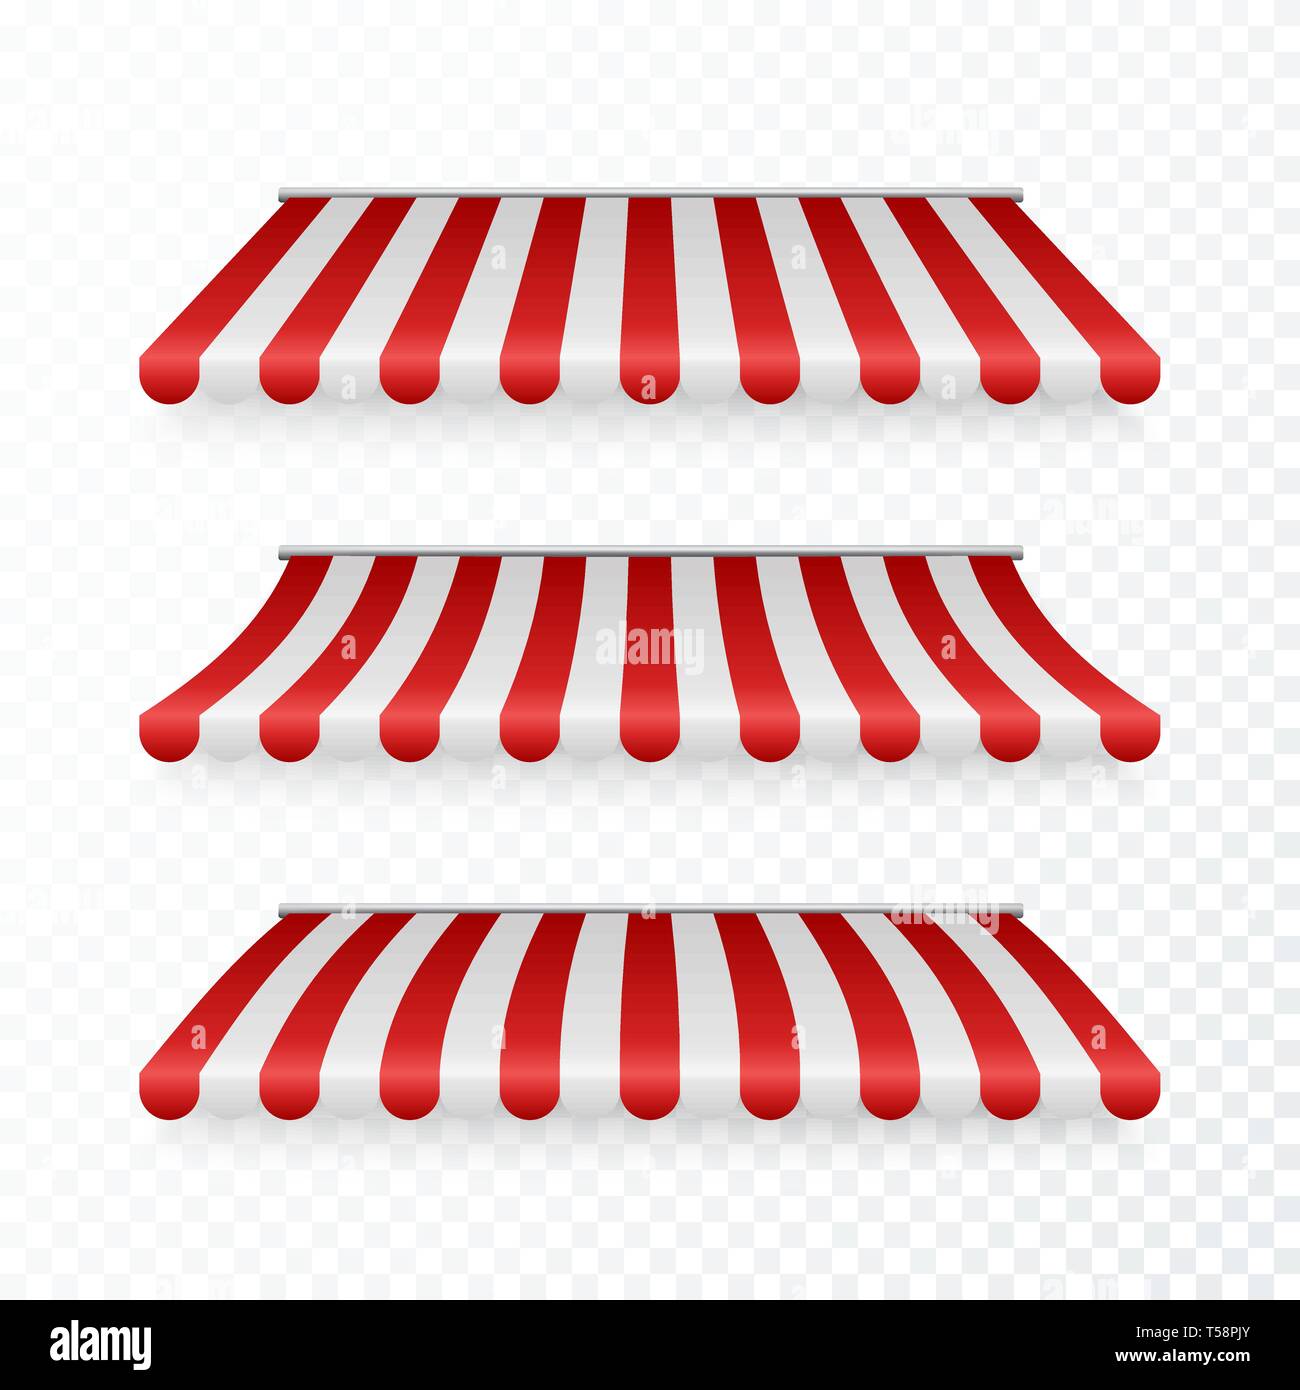 Awning set with shadows. Marketplace striped roof. Vector illustration Stock Vector